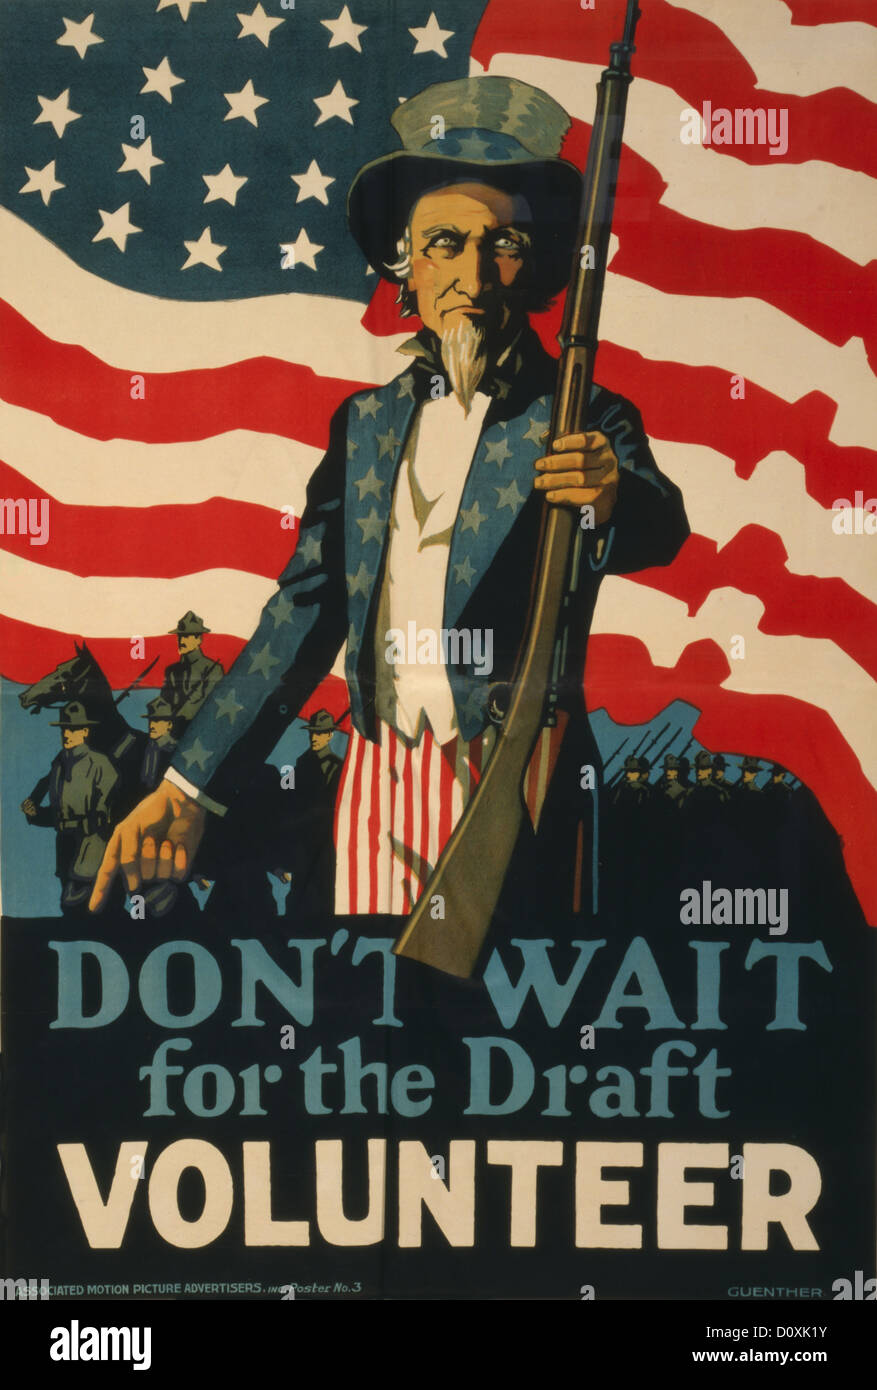 World War I, American, recruitment, poster, Uncle Sam, army, troops, flag, rifle, draft, Volunteer, 1917, Stock Photo